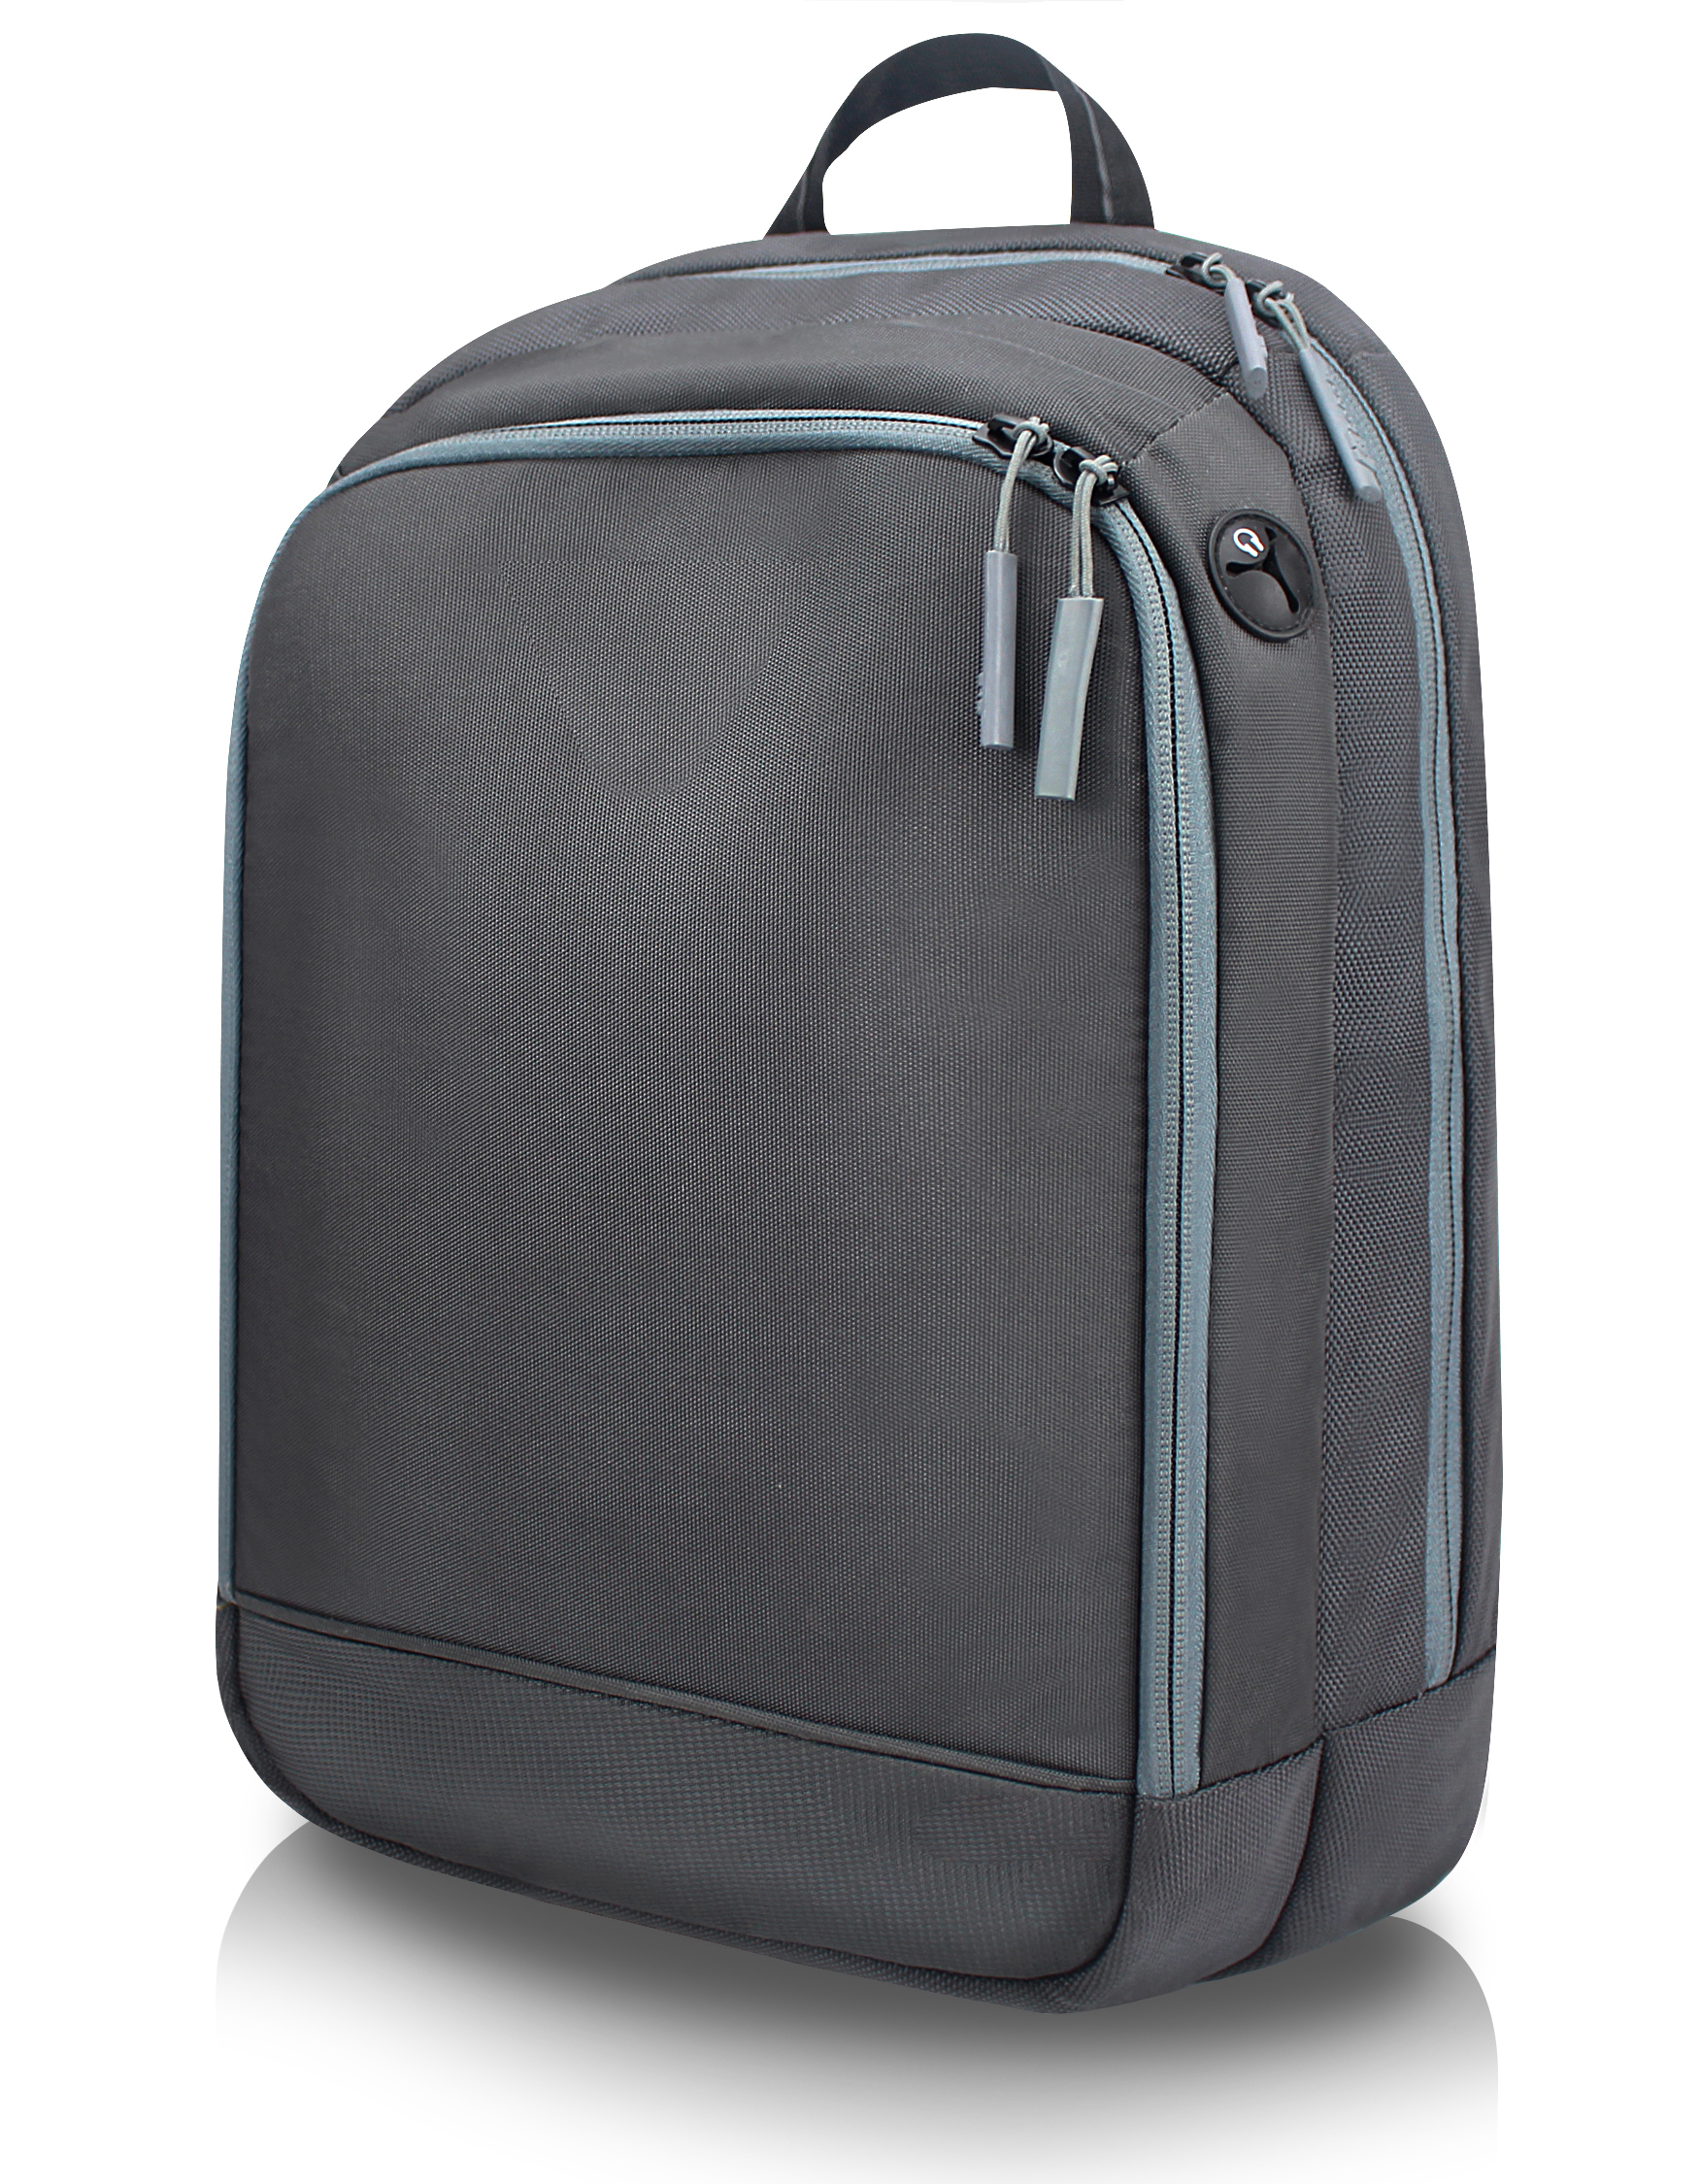  Large capacity dark gray cable hole polyester backpack laptop bookbag computer bag with compartments with dual two-way zipper closure for business work commuter college School for men women